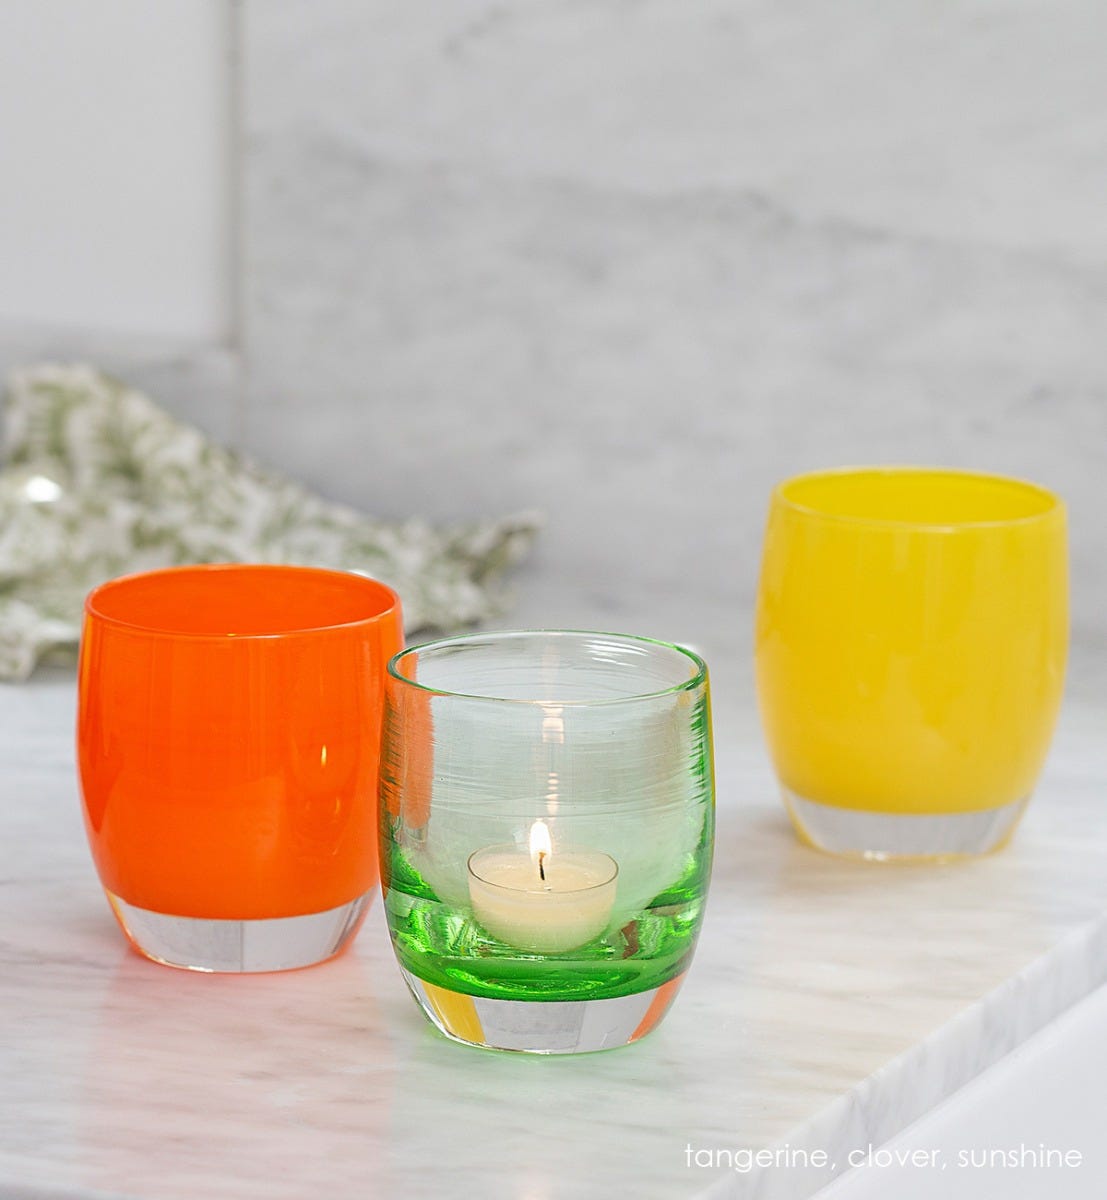 tangerine orange hand-blown glass votive candle holder. Paired with clover and sunshine.